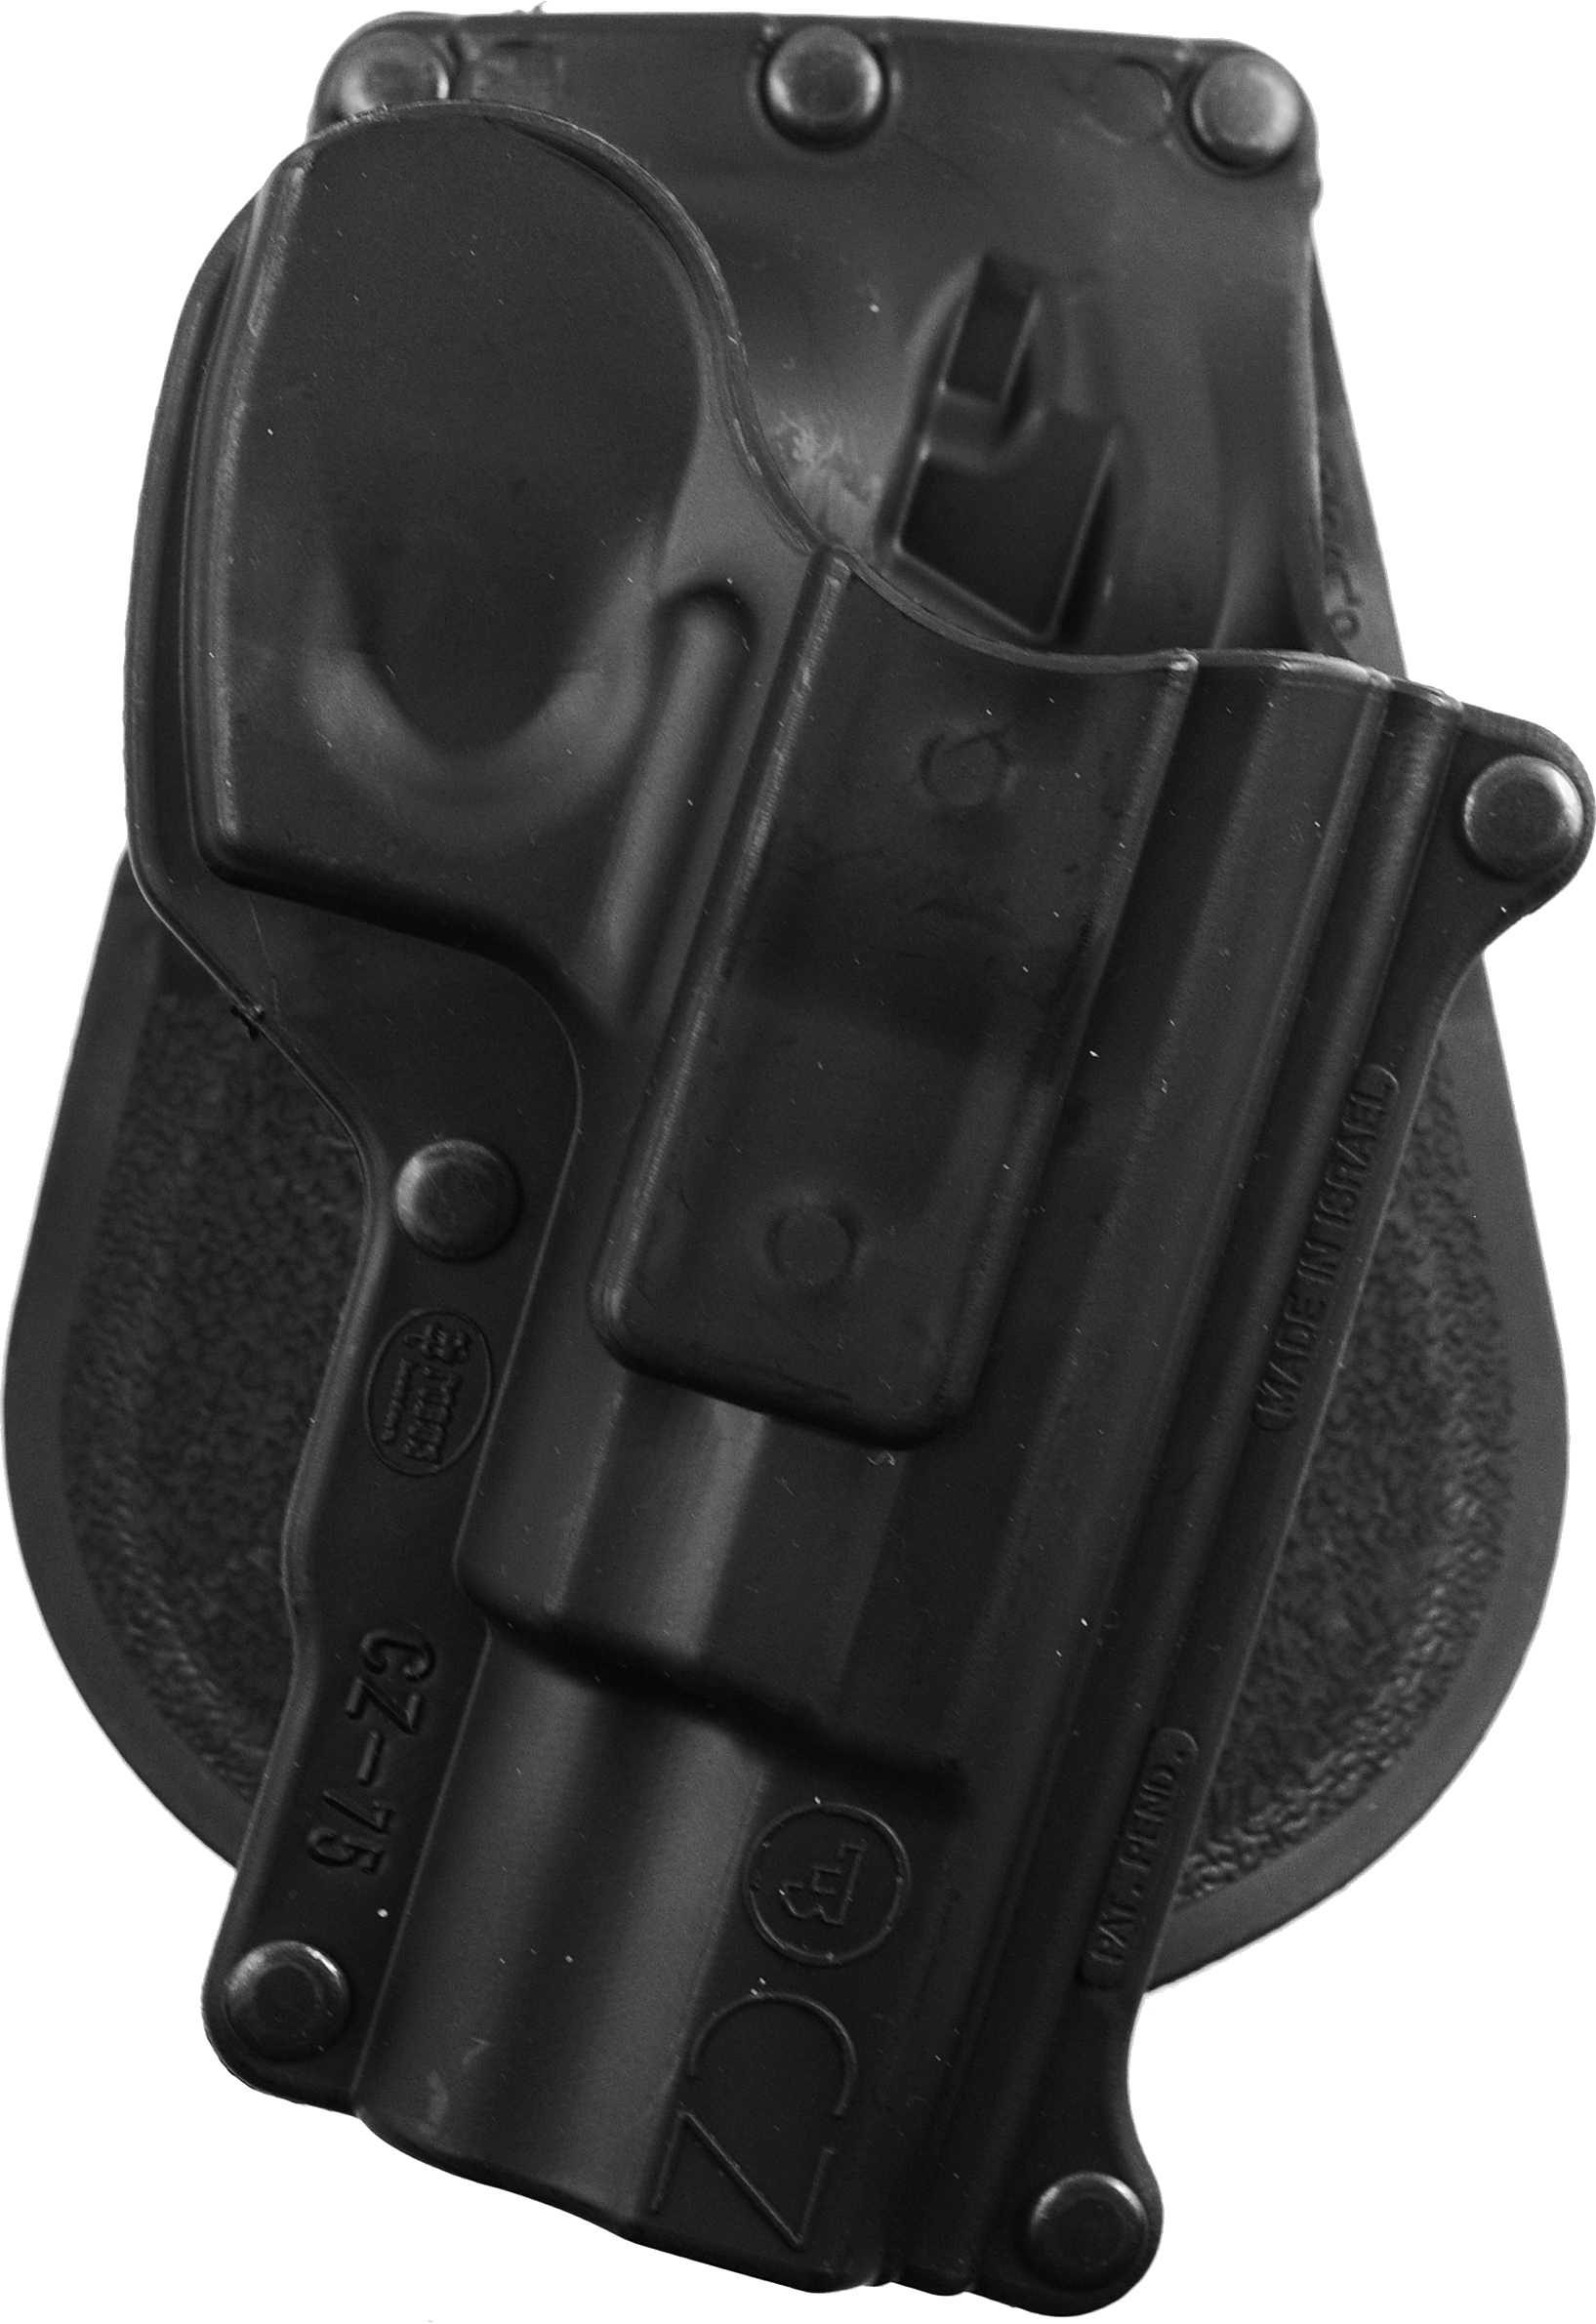 Fobus CZ75 RH Paddle Holster for CZ 75 75BD 85 75D Compact 9mm Cadet .22 for sale online 